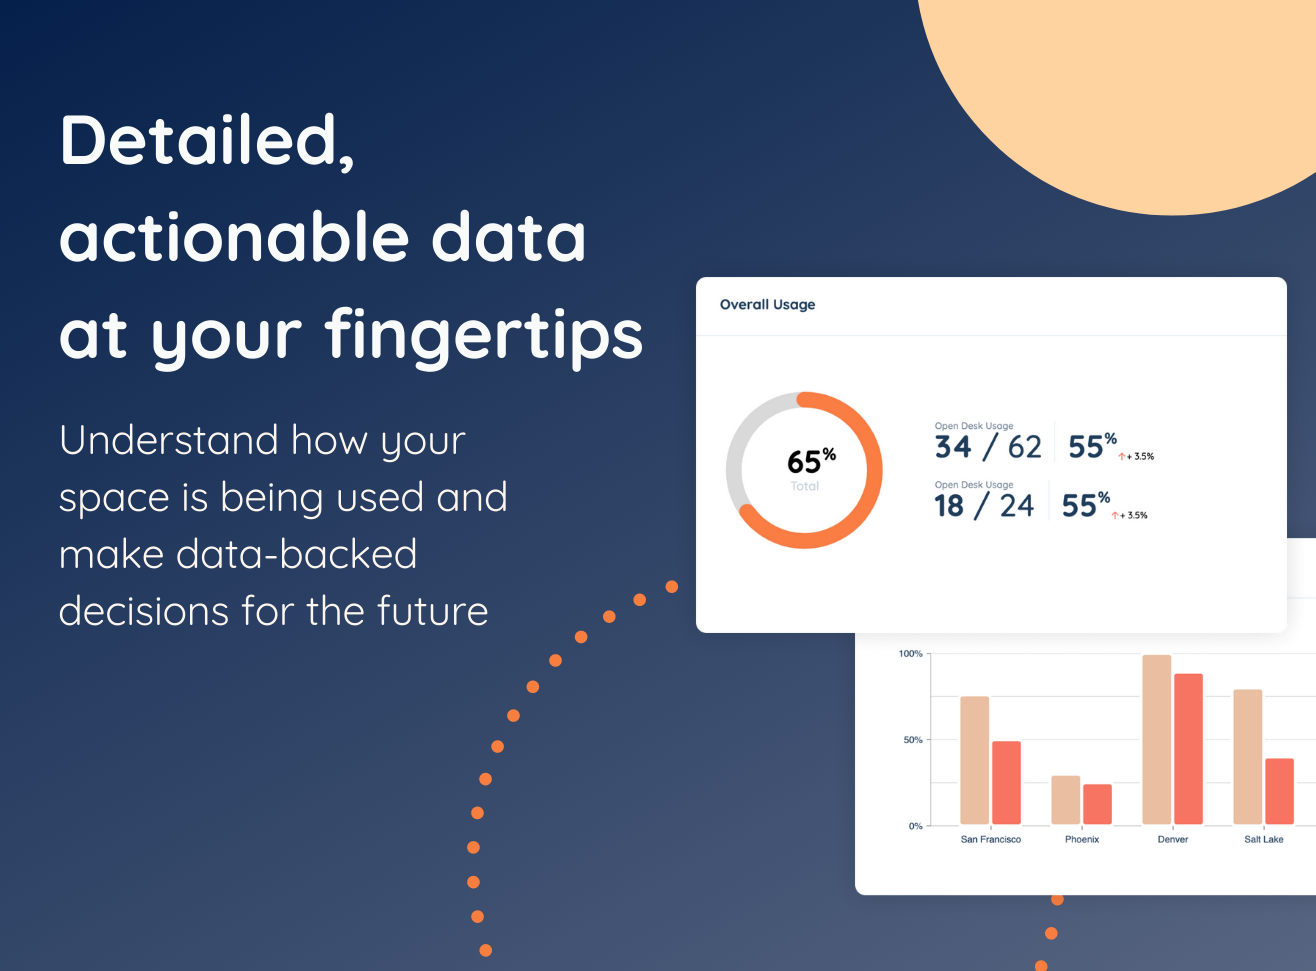 Detailed, actionable data at your fingertips